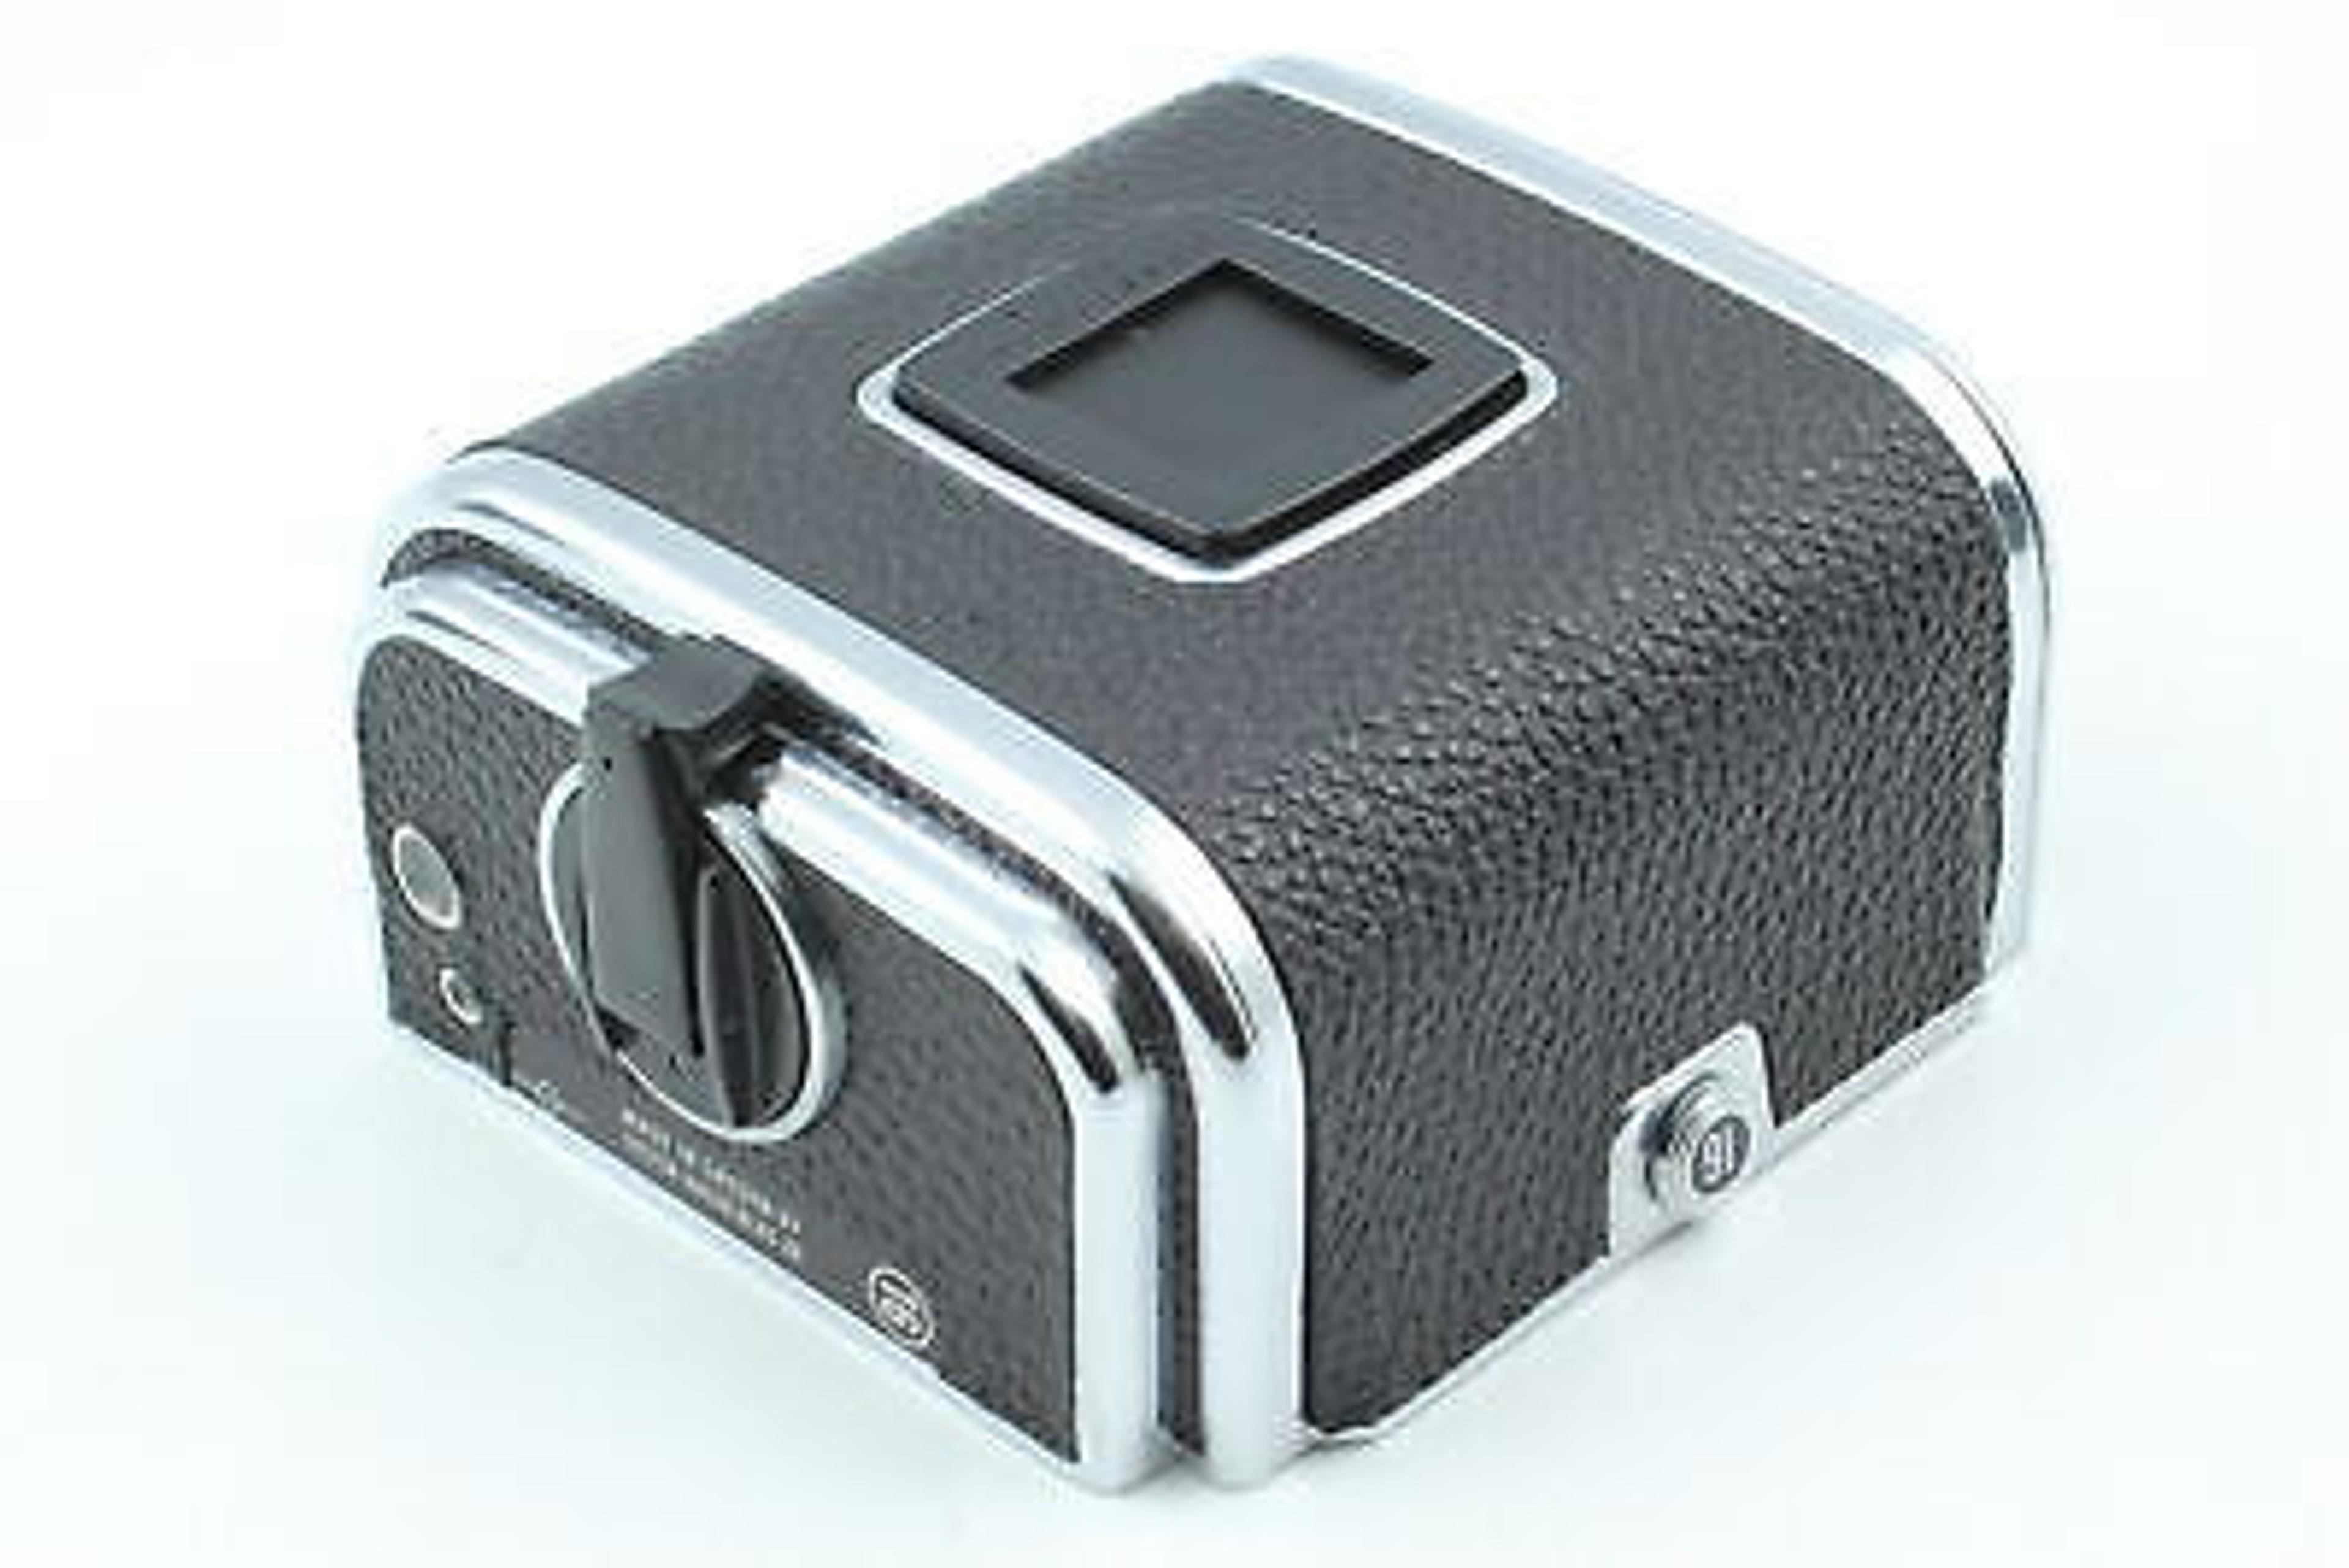 Hasselblad A16 Type III Chrome 6x4.5 645 Film Back Holder [Near MINT] From Japan